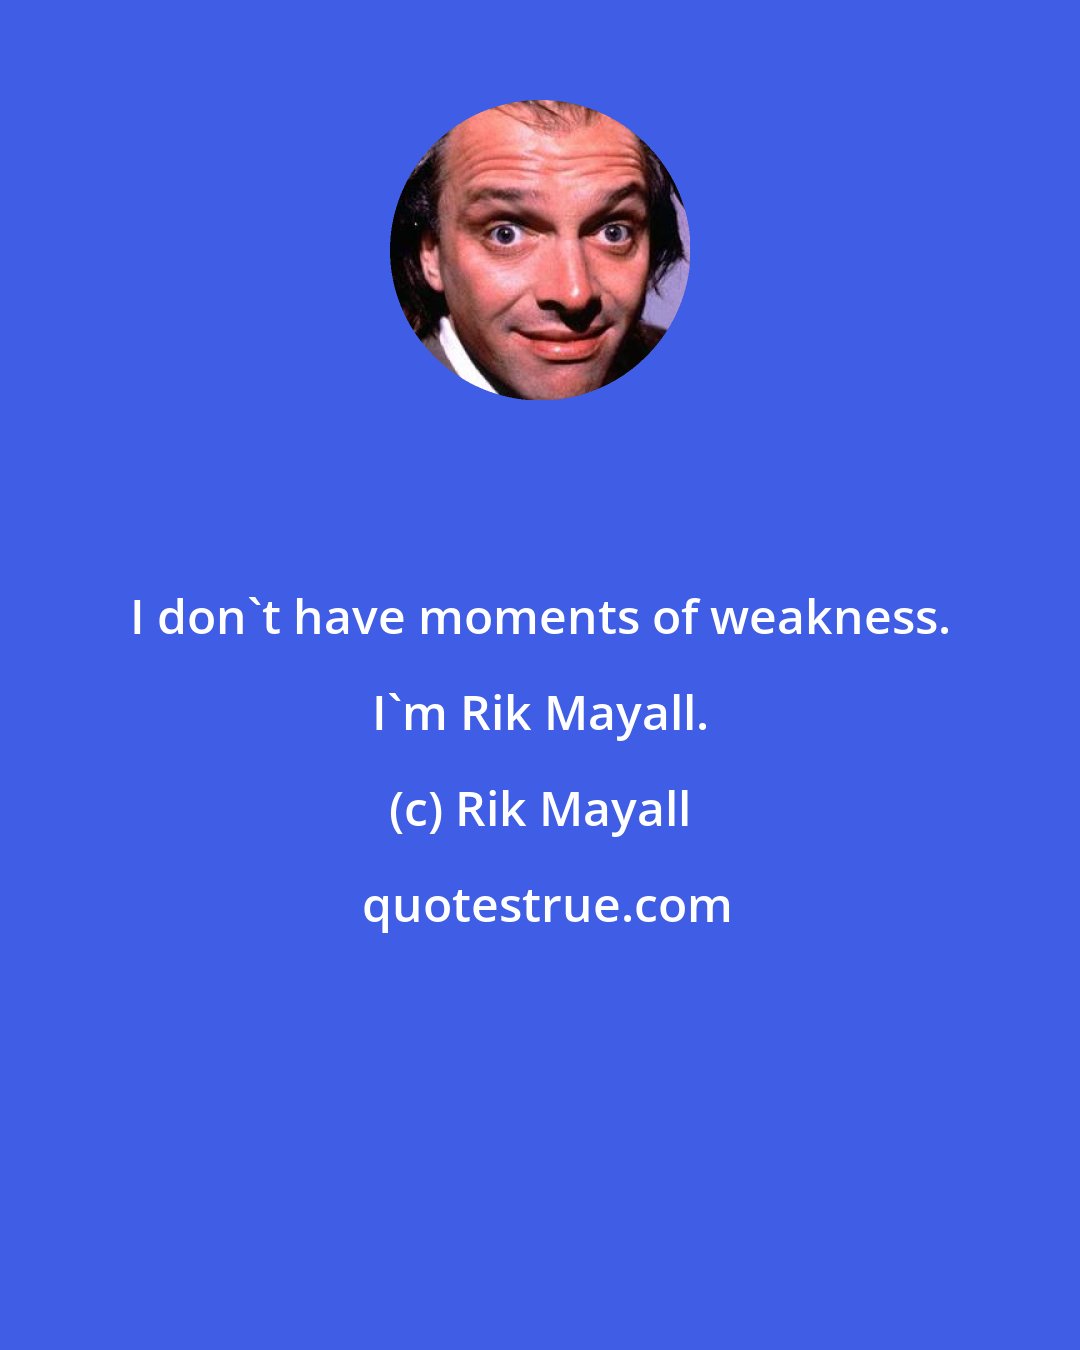 Rik Mayall: I don't have moments of weakness. I'm Rik Mayall.